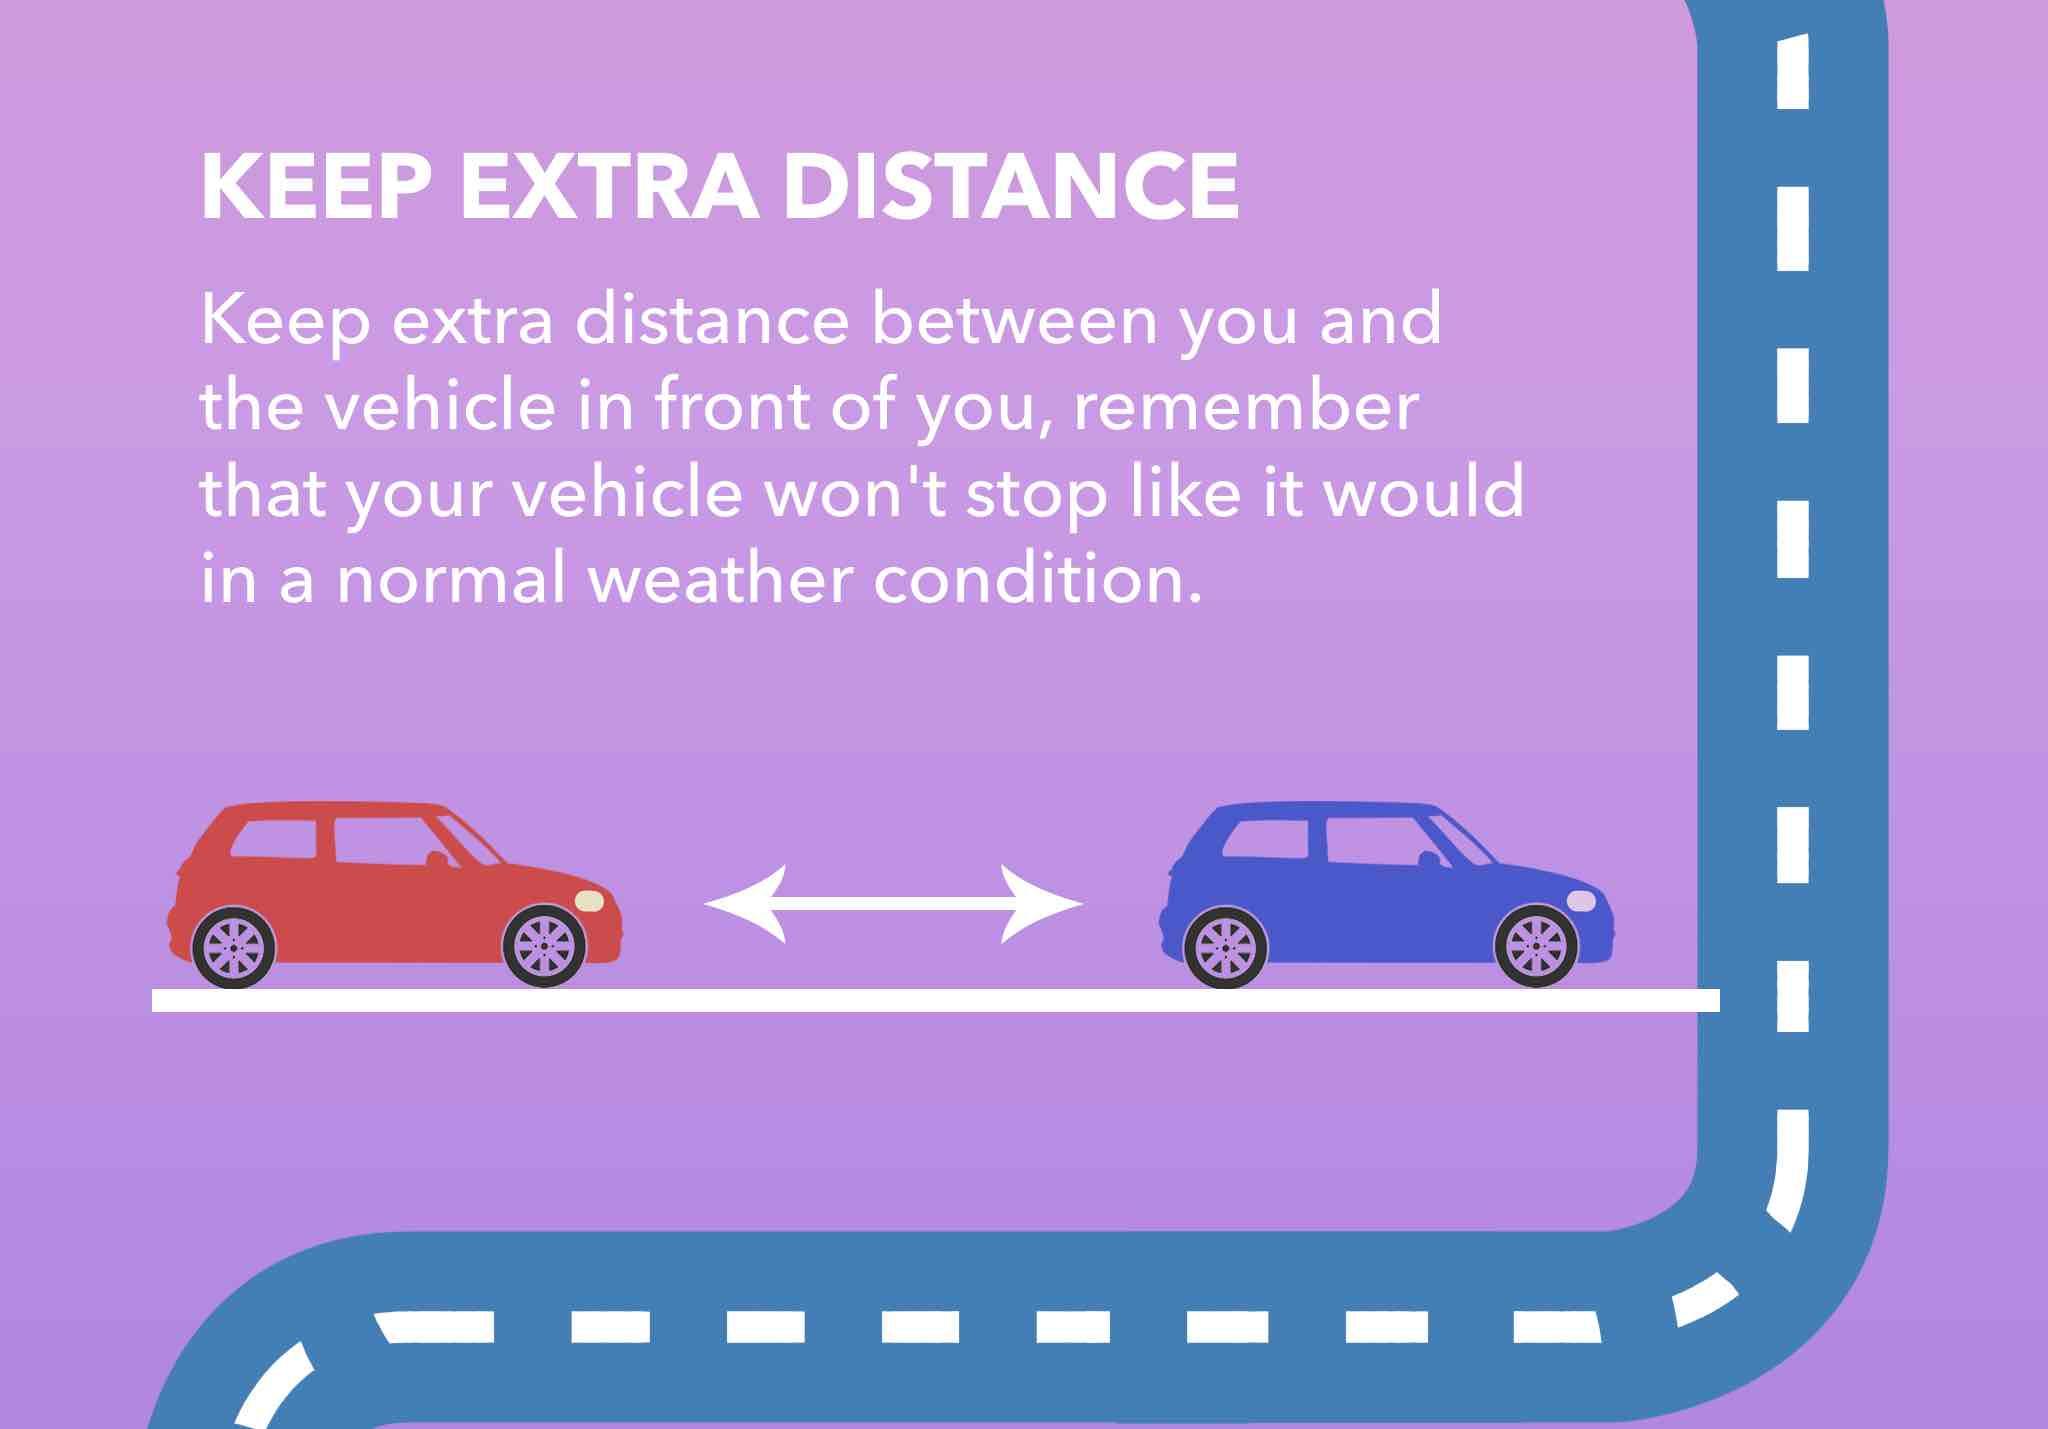 Keep extra distance between you and  the vehicle in front of you, remember  that your vehicle won't stop like it would in a normal weather condition.